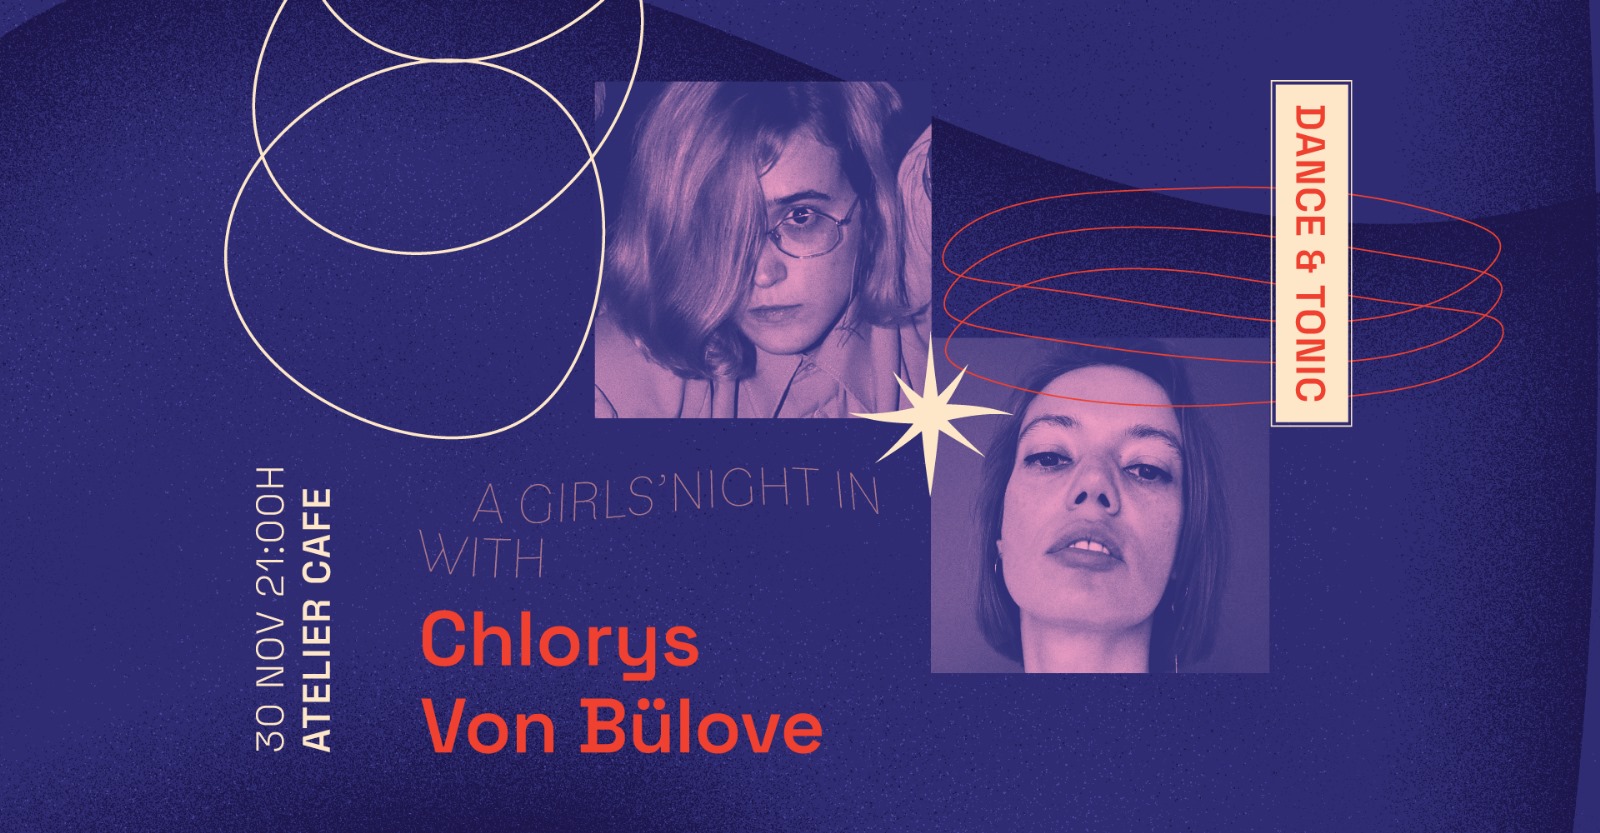 Dance & Tonic A girls’ night in with Chlorys and Von Buelove